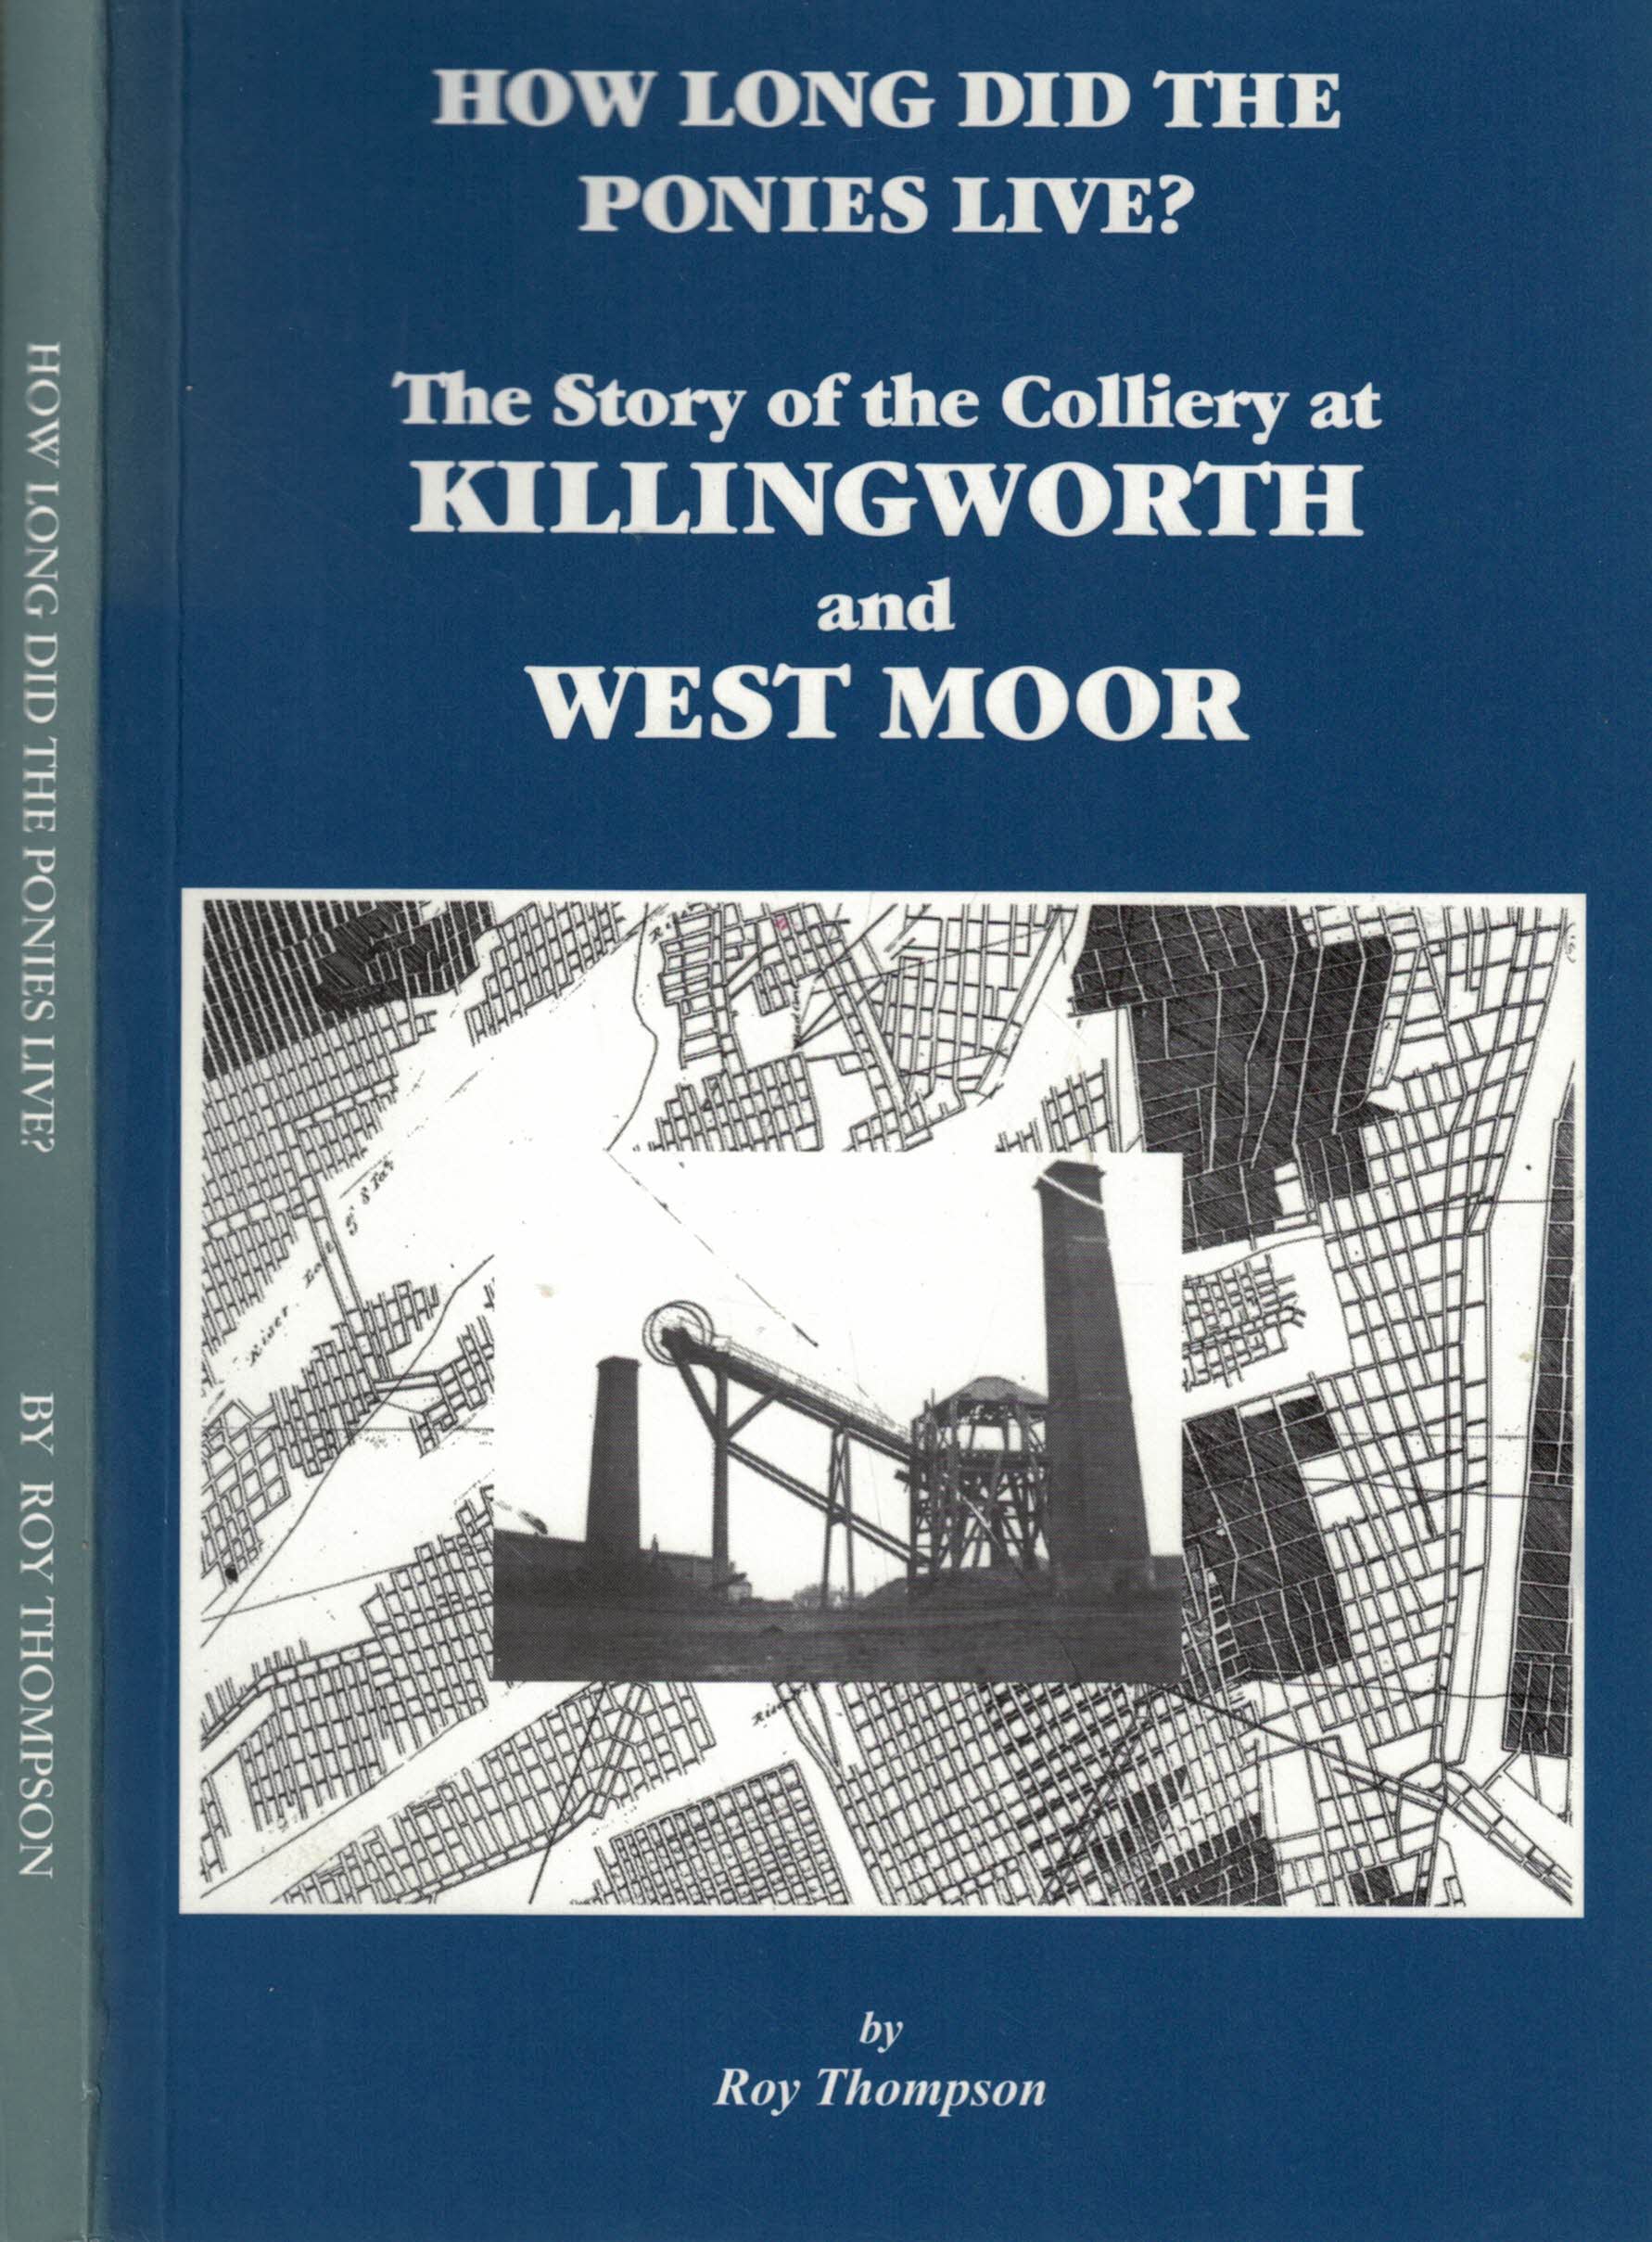 How Long did the Ponies Live? The Story of the Colliery at Killingworth and West Moor.